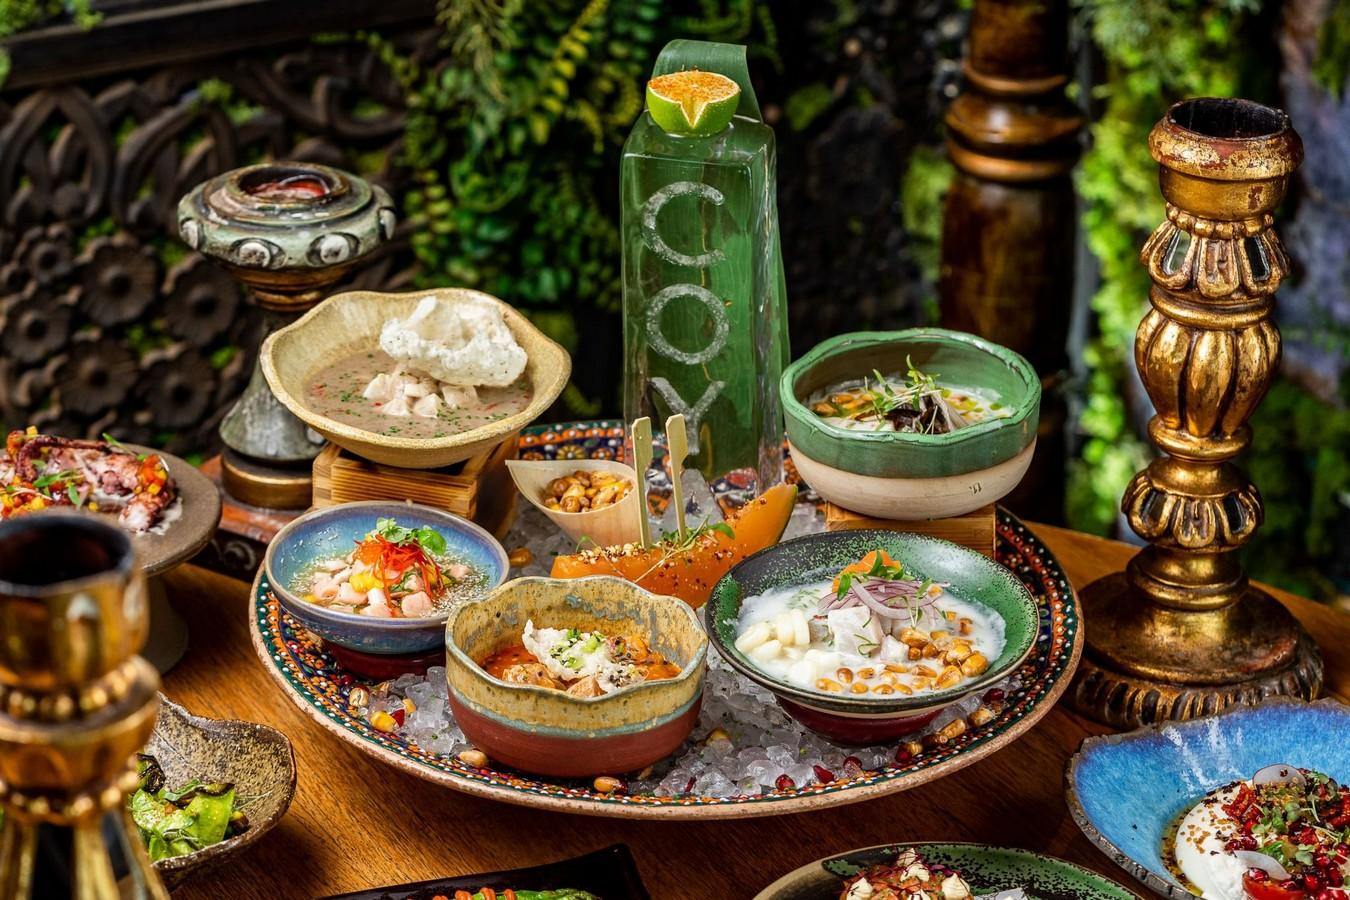 These are the best brunches in Dubai on Saturday!